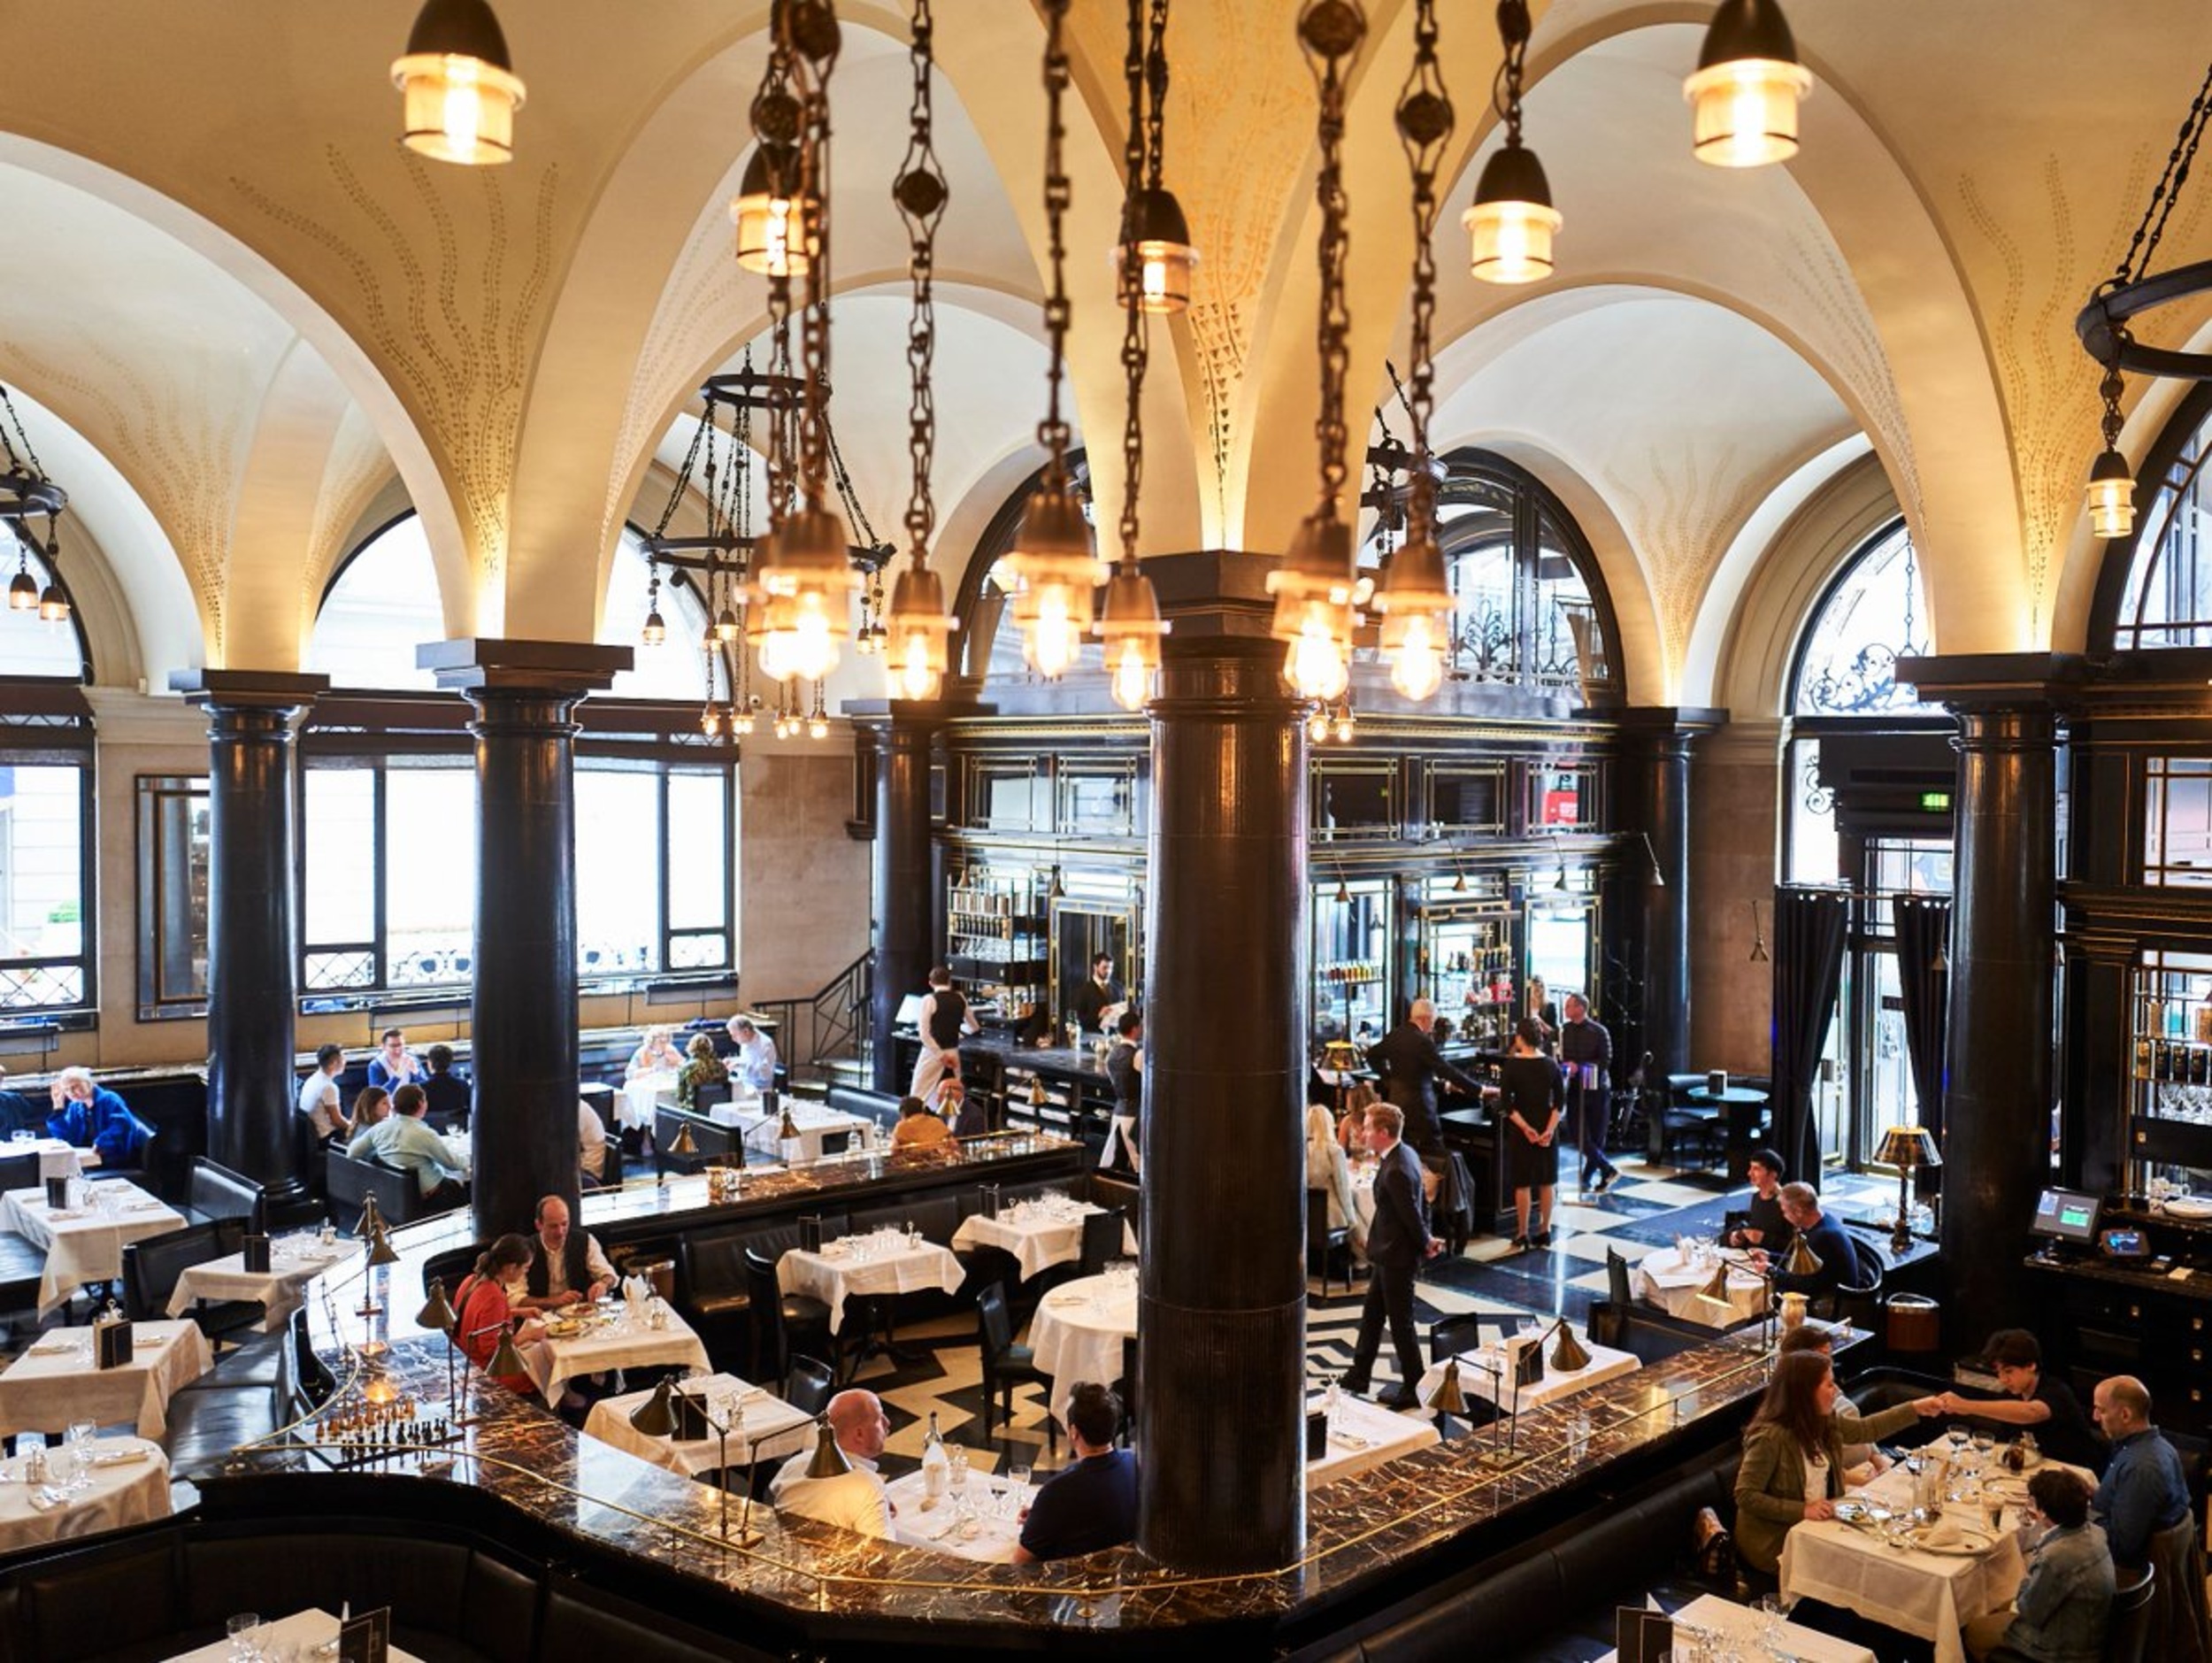 <p>London has become a hipper and more urban city in recent years, which is bound to attract more tourists and homeless people. But if you want to settle into a chic, old-school version of London--the kind you see in magazine photos--head over to The Wolseley for one of the classiest meals in Europe. </p><p><a href='https://www.msn.com/en-us/community/channel/vid-cj9pqbr0vn9in2b6ddcd8sfgpfq6x6utp44fssrv6mc2gtybw0us'>Follow us on MSN to see more of our exclusive lifestyle content.</a></p>